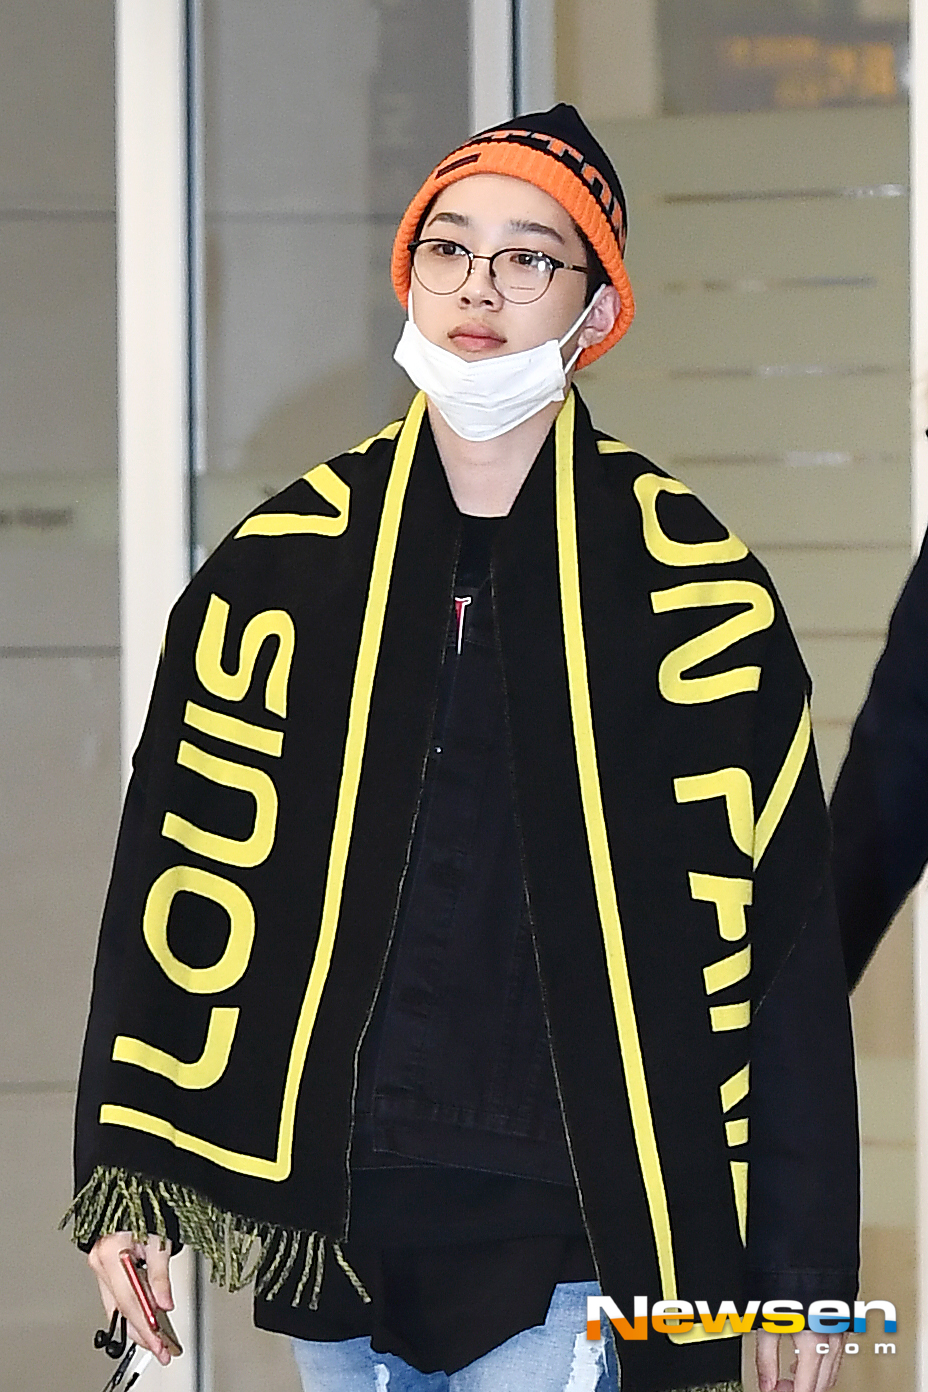 Former Wanna One member Lai Kuan-lin (LAIKUANLIN) arrived at the Incheon International Airport in Unseo-dong, Jung-gu, Incheon on the afternoon of February 20 after completing an overseas schedule.exponential earthquake